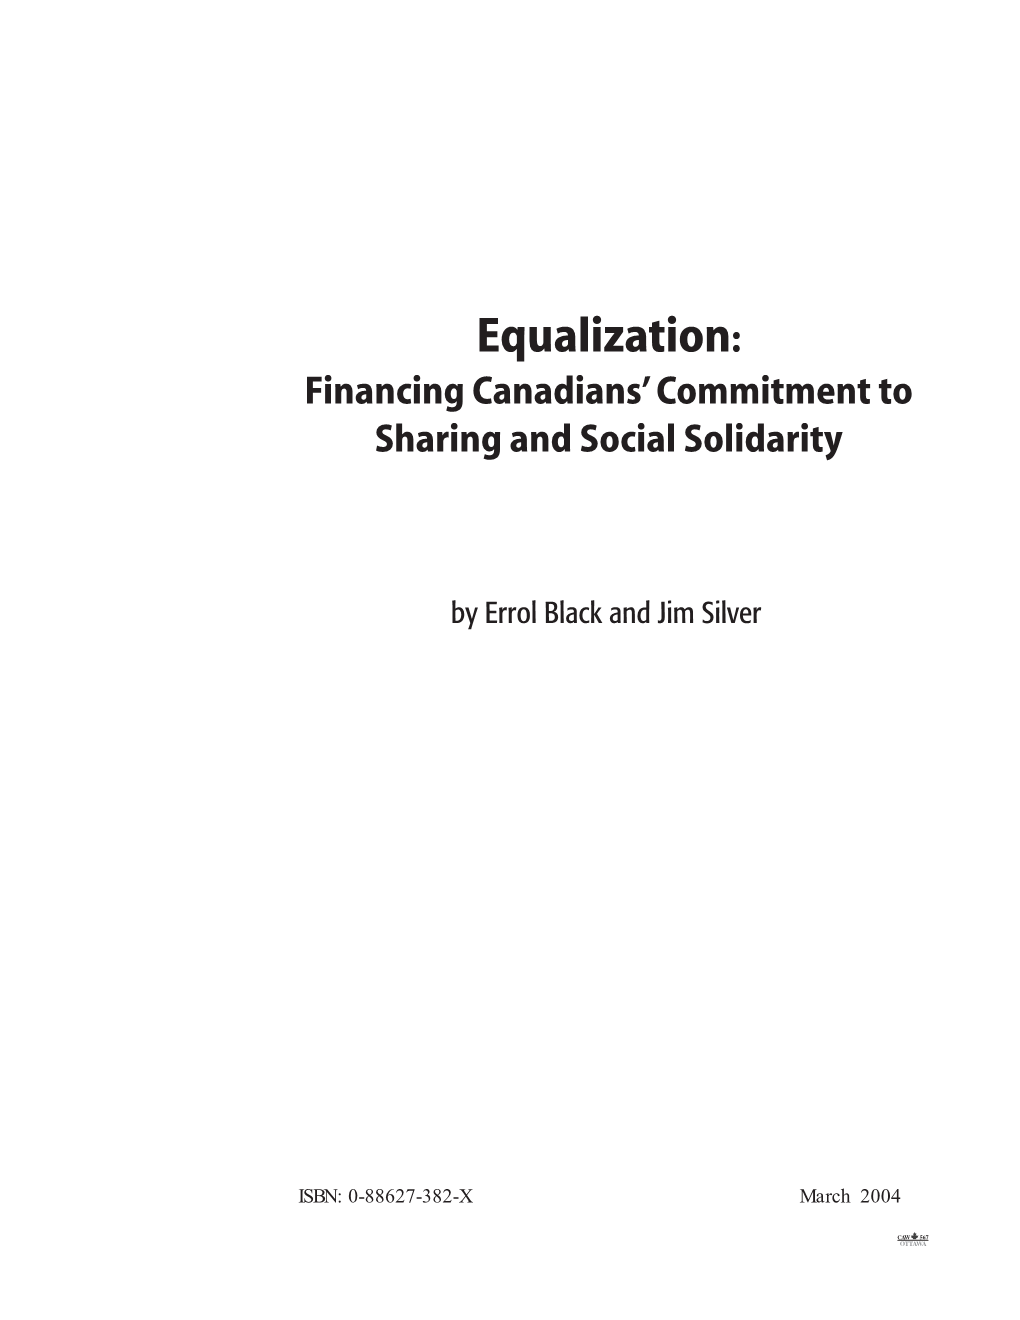 Equalization: Financing Canadians’ Commitment to Sharing and Social Solidarity